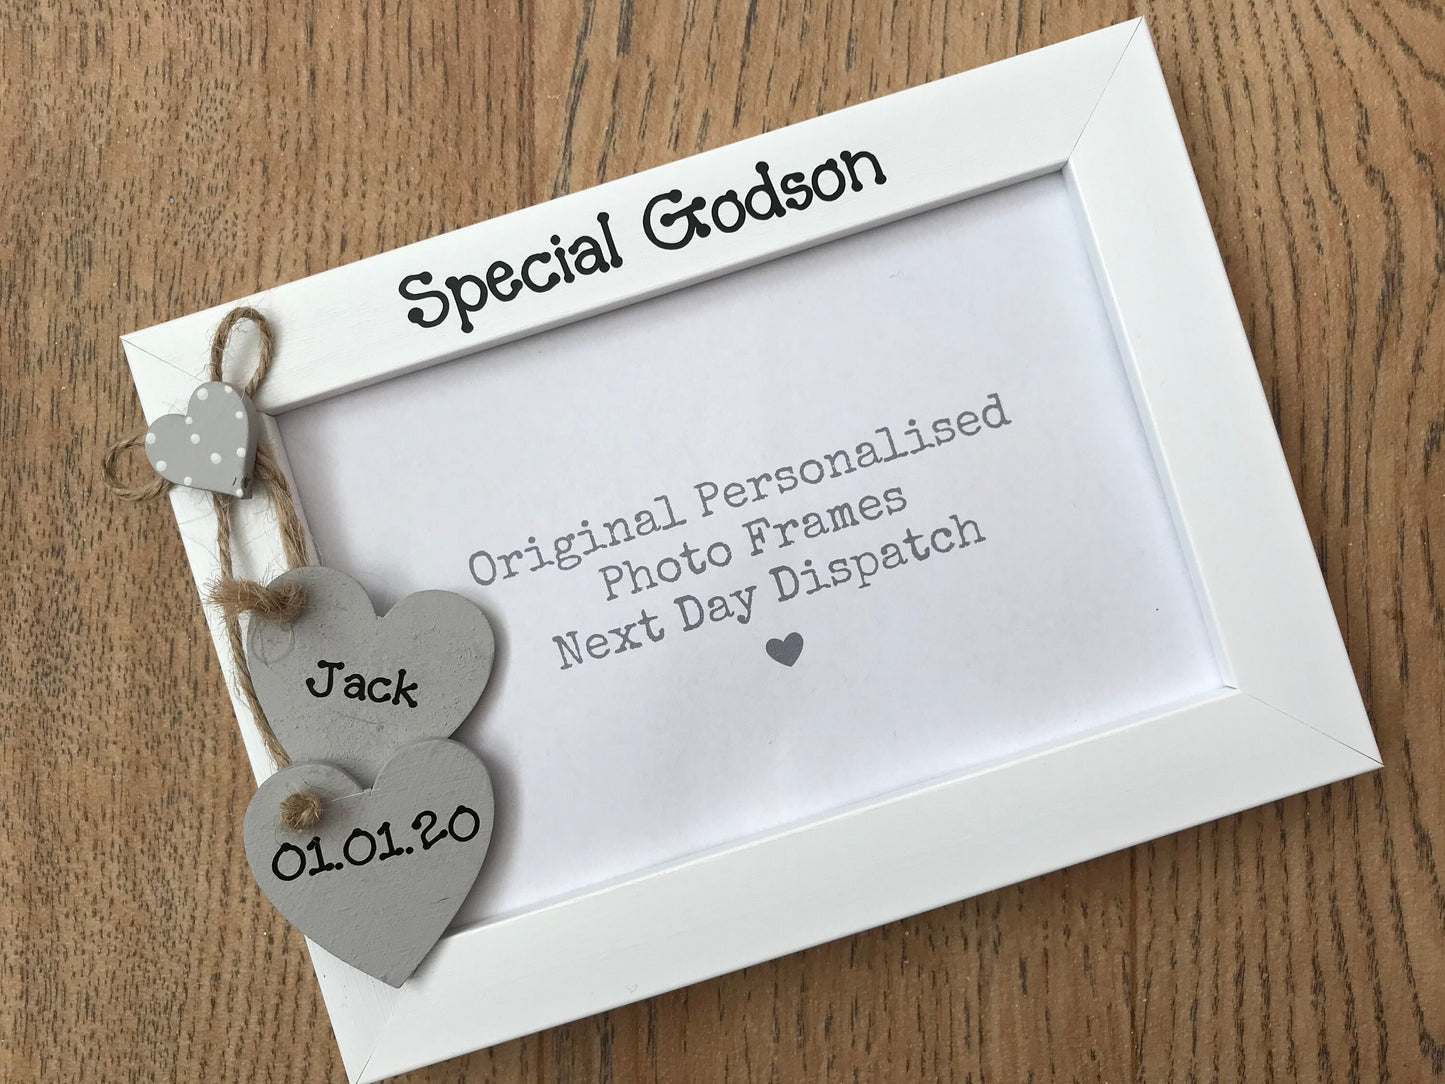 Handcrafted Personalised Special Godson Picture Frame